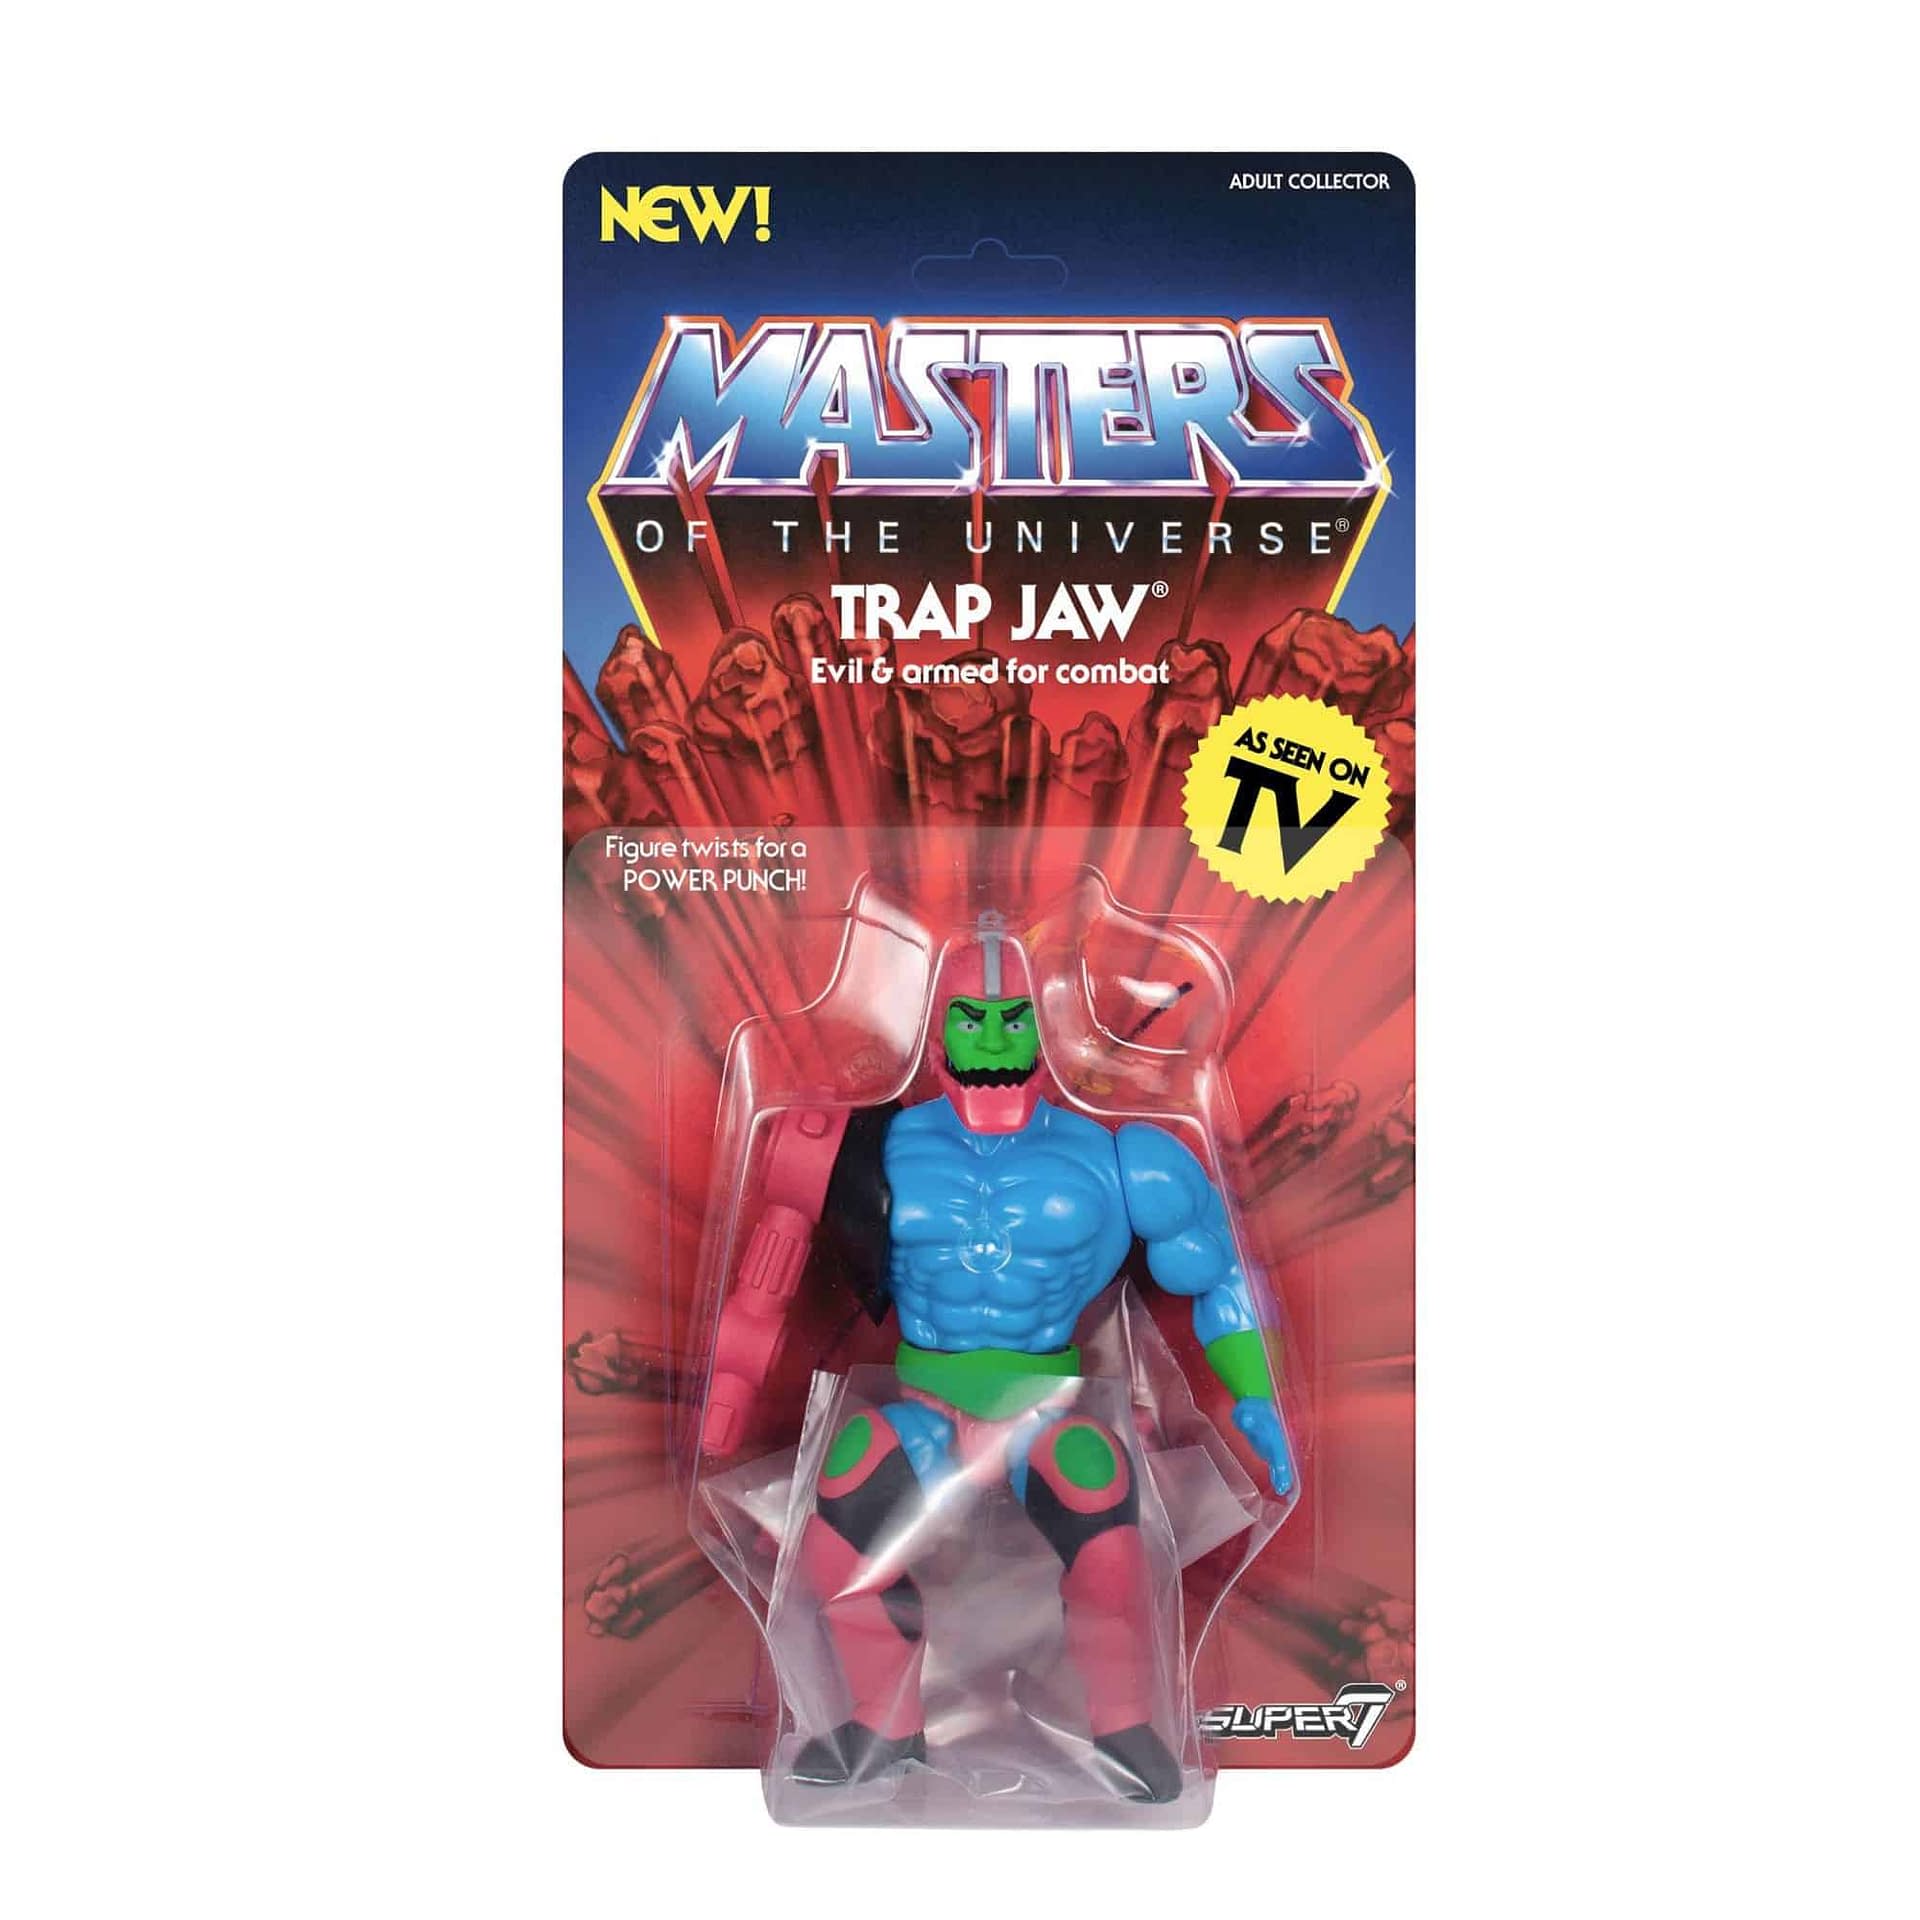 Masters of the Universe Vintage Trap Jaw